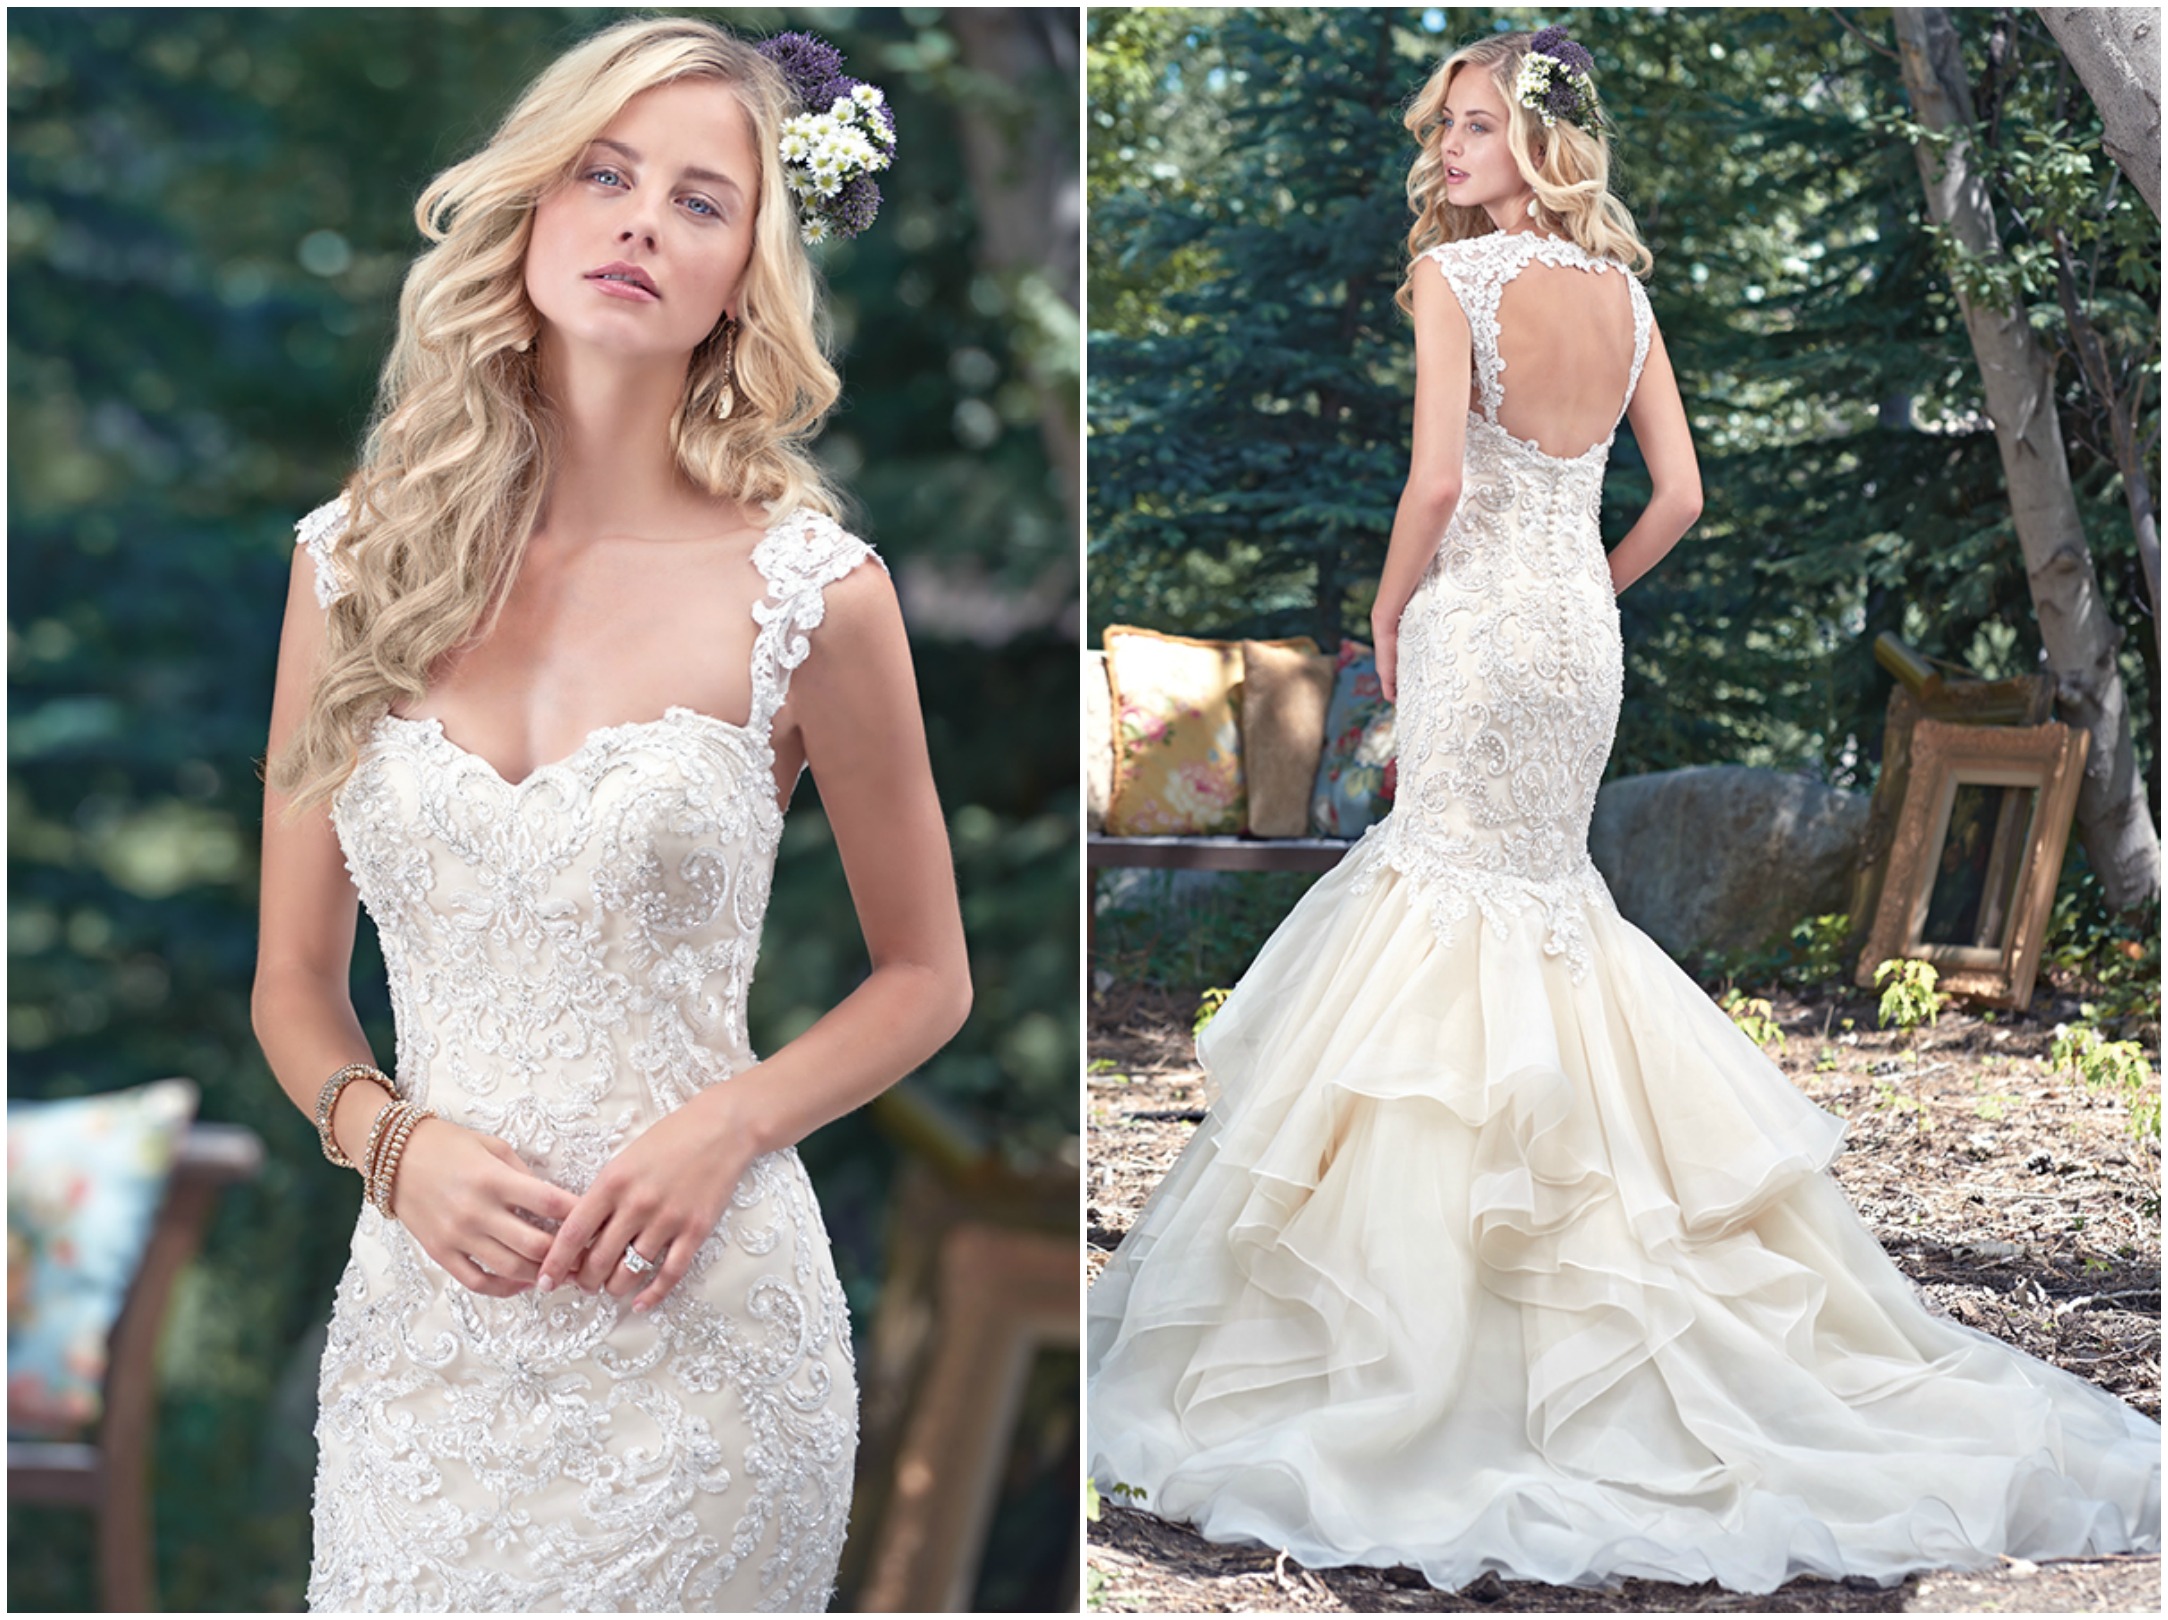 <a href="http://www.maggiesottero.com/maggie-sottero/malina/9533" target="_blank">Maggie Sottero Spring 2016</a>